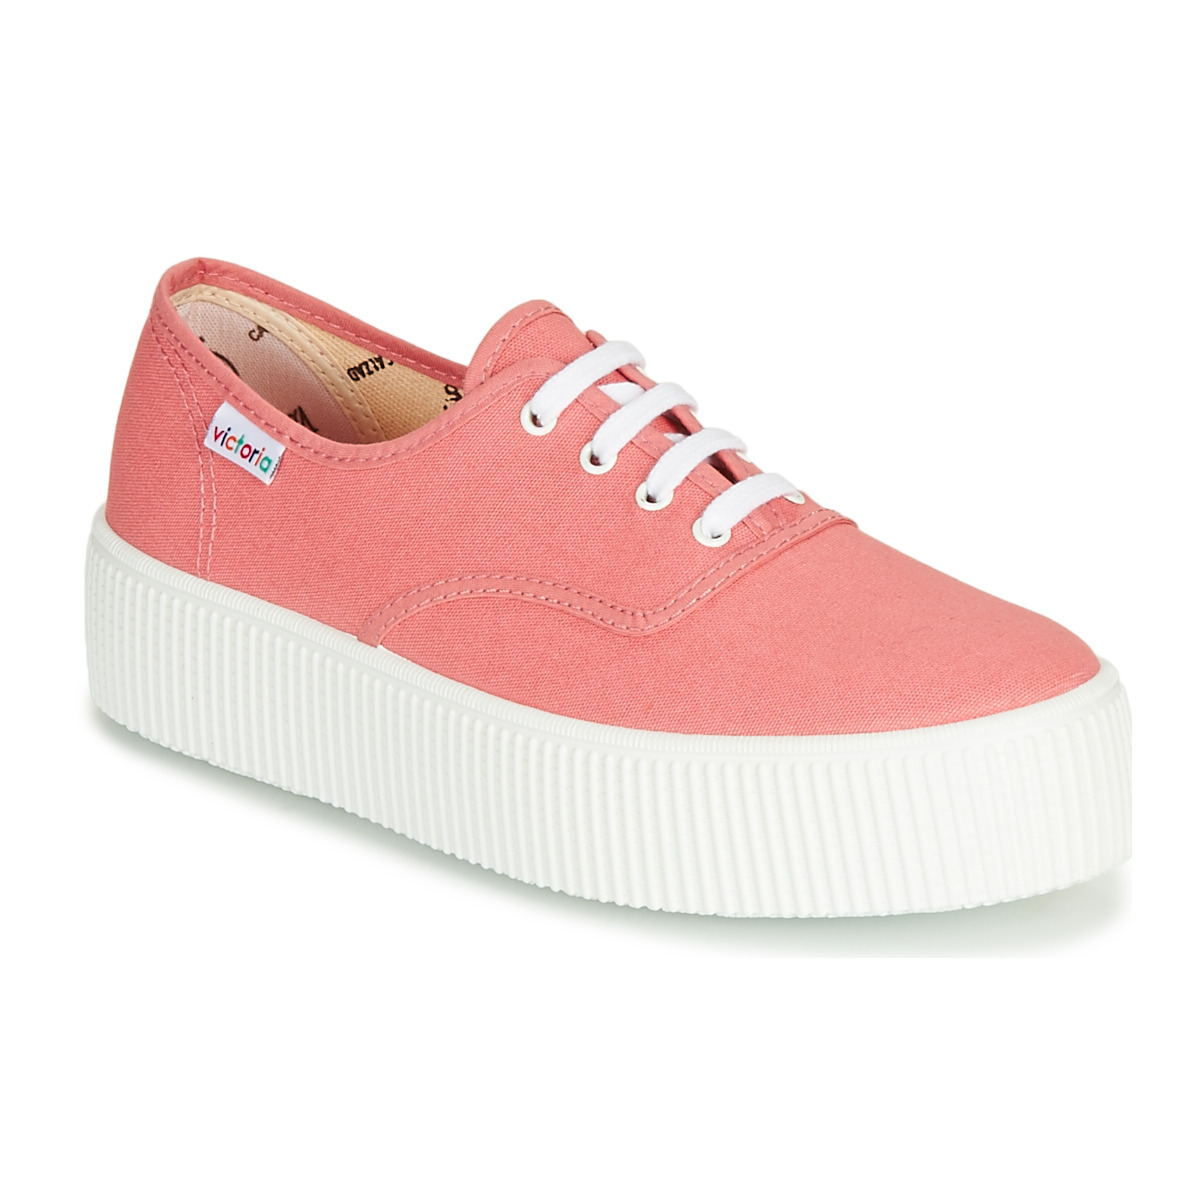 Spartoo Lady Sneakers in Pink by Victoria GOOFASH